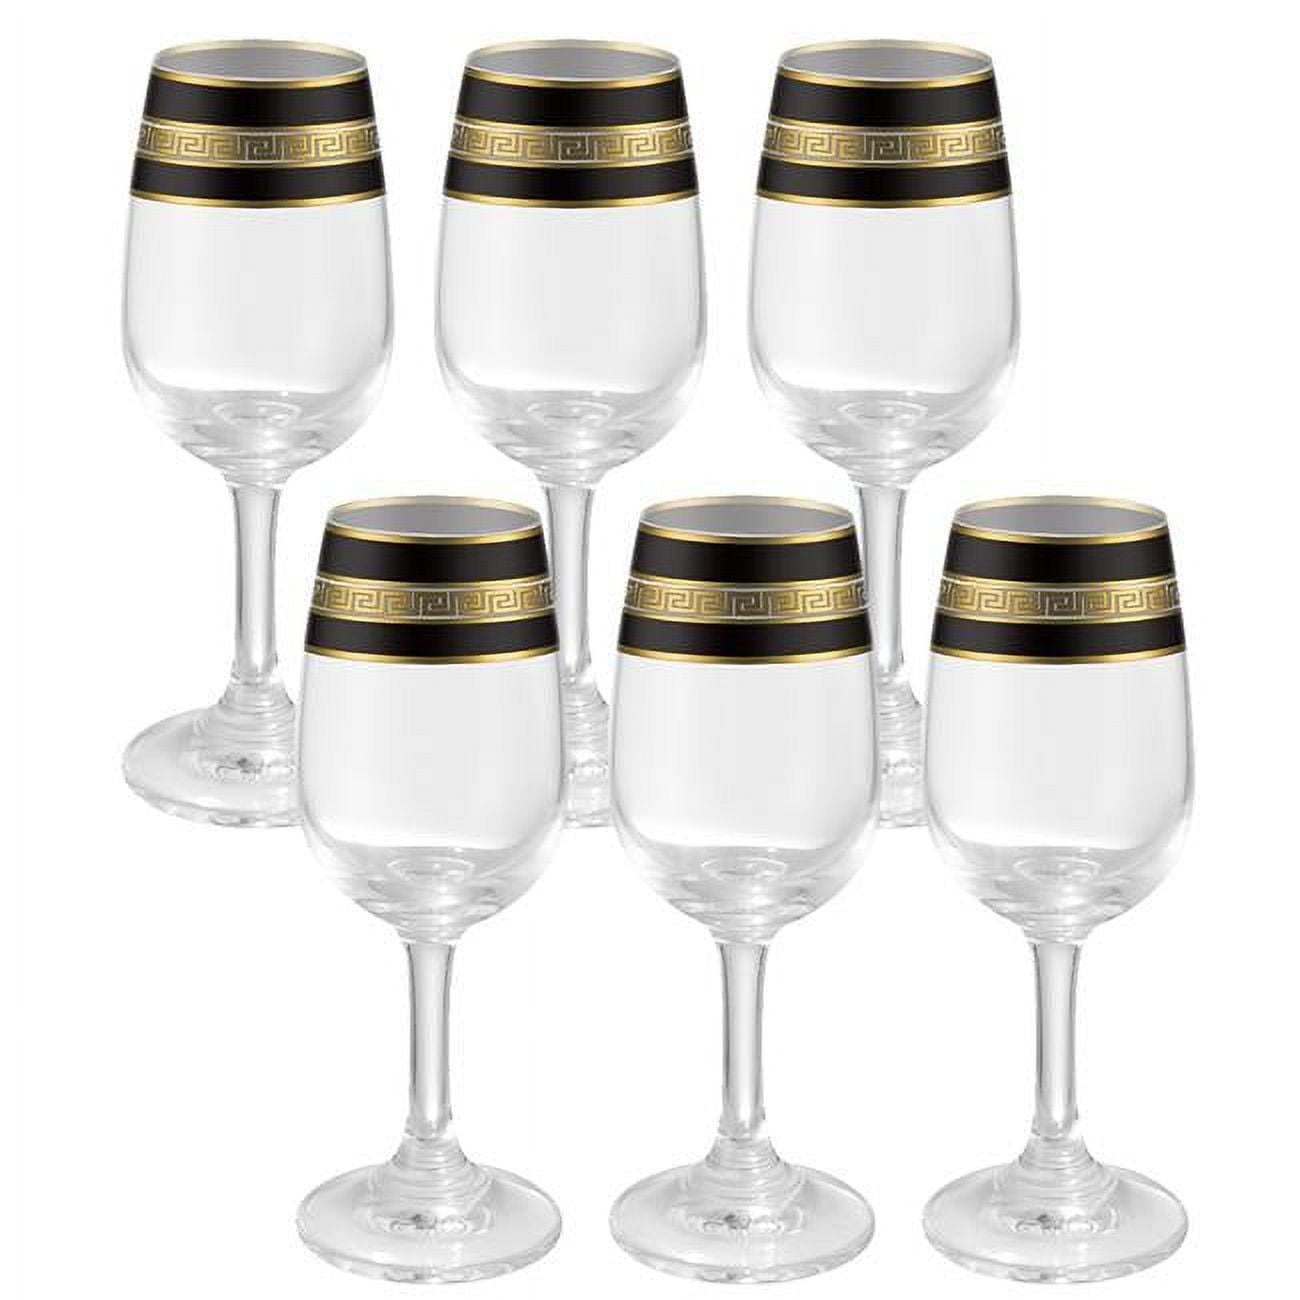 Picture of Brilliant Gifts B3193.007.BL 2 oz Black Liquor Cups - Set of 6